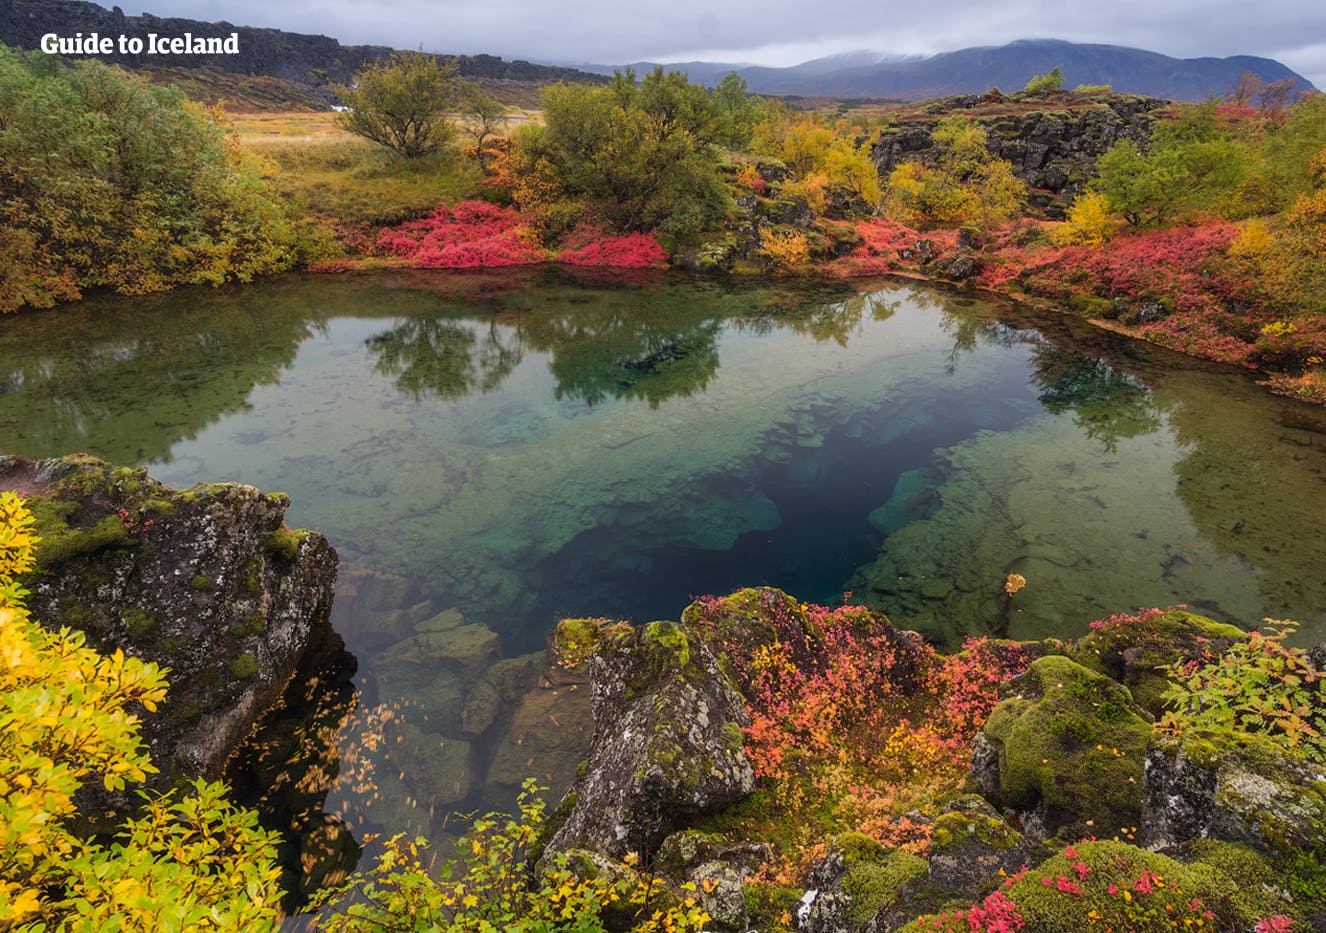 The clear waters of the Silfra Fissure in Thingvellir National Park on the Golden Circle Tourist Route of Iceland.